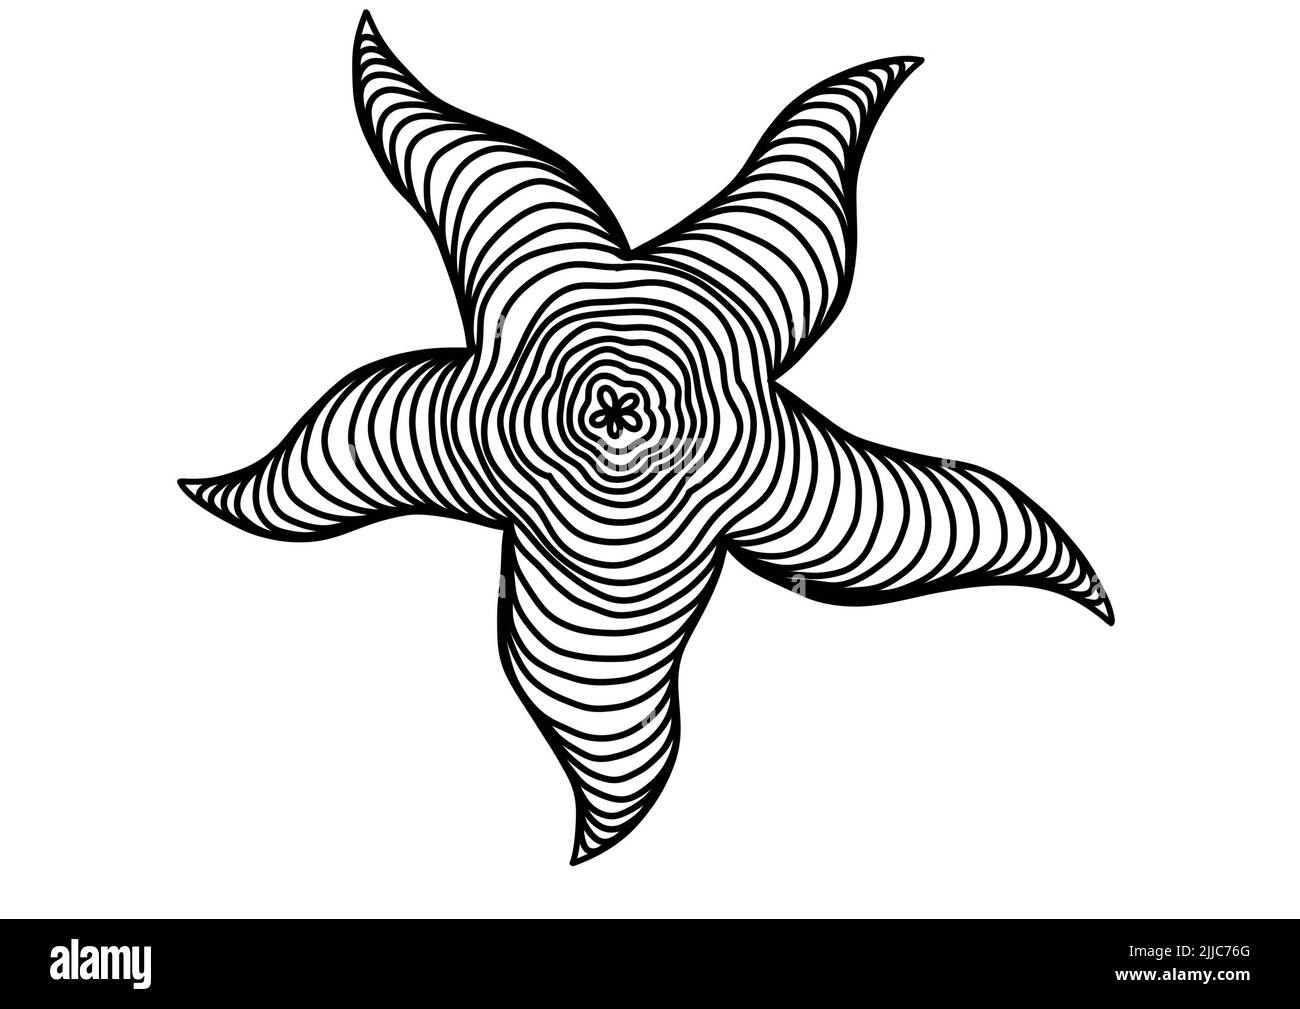 A Black and white line art  drawing of a star fish for background, logo and other illustration needs Stock Photo